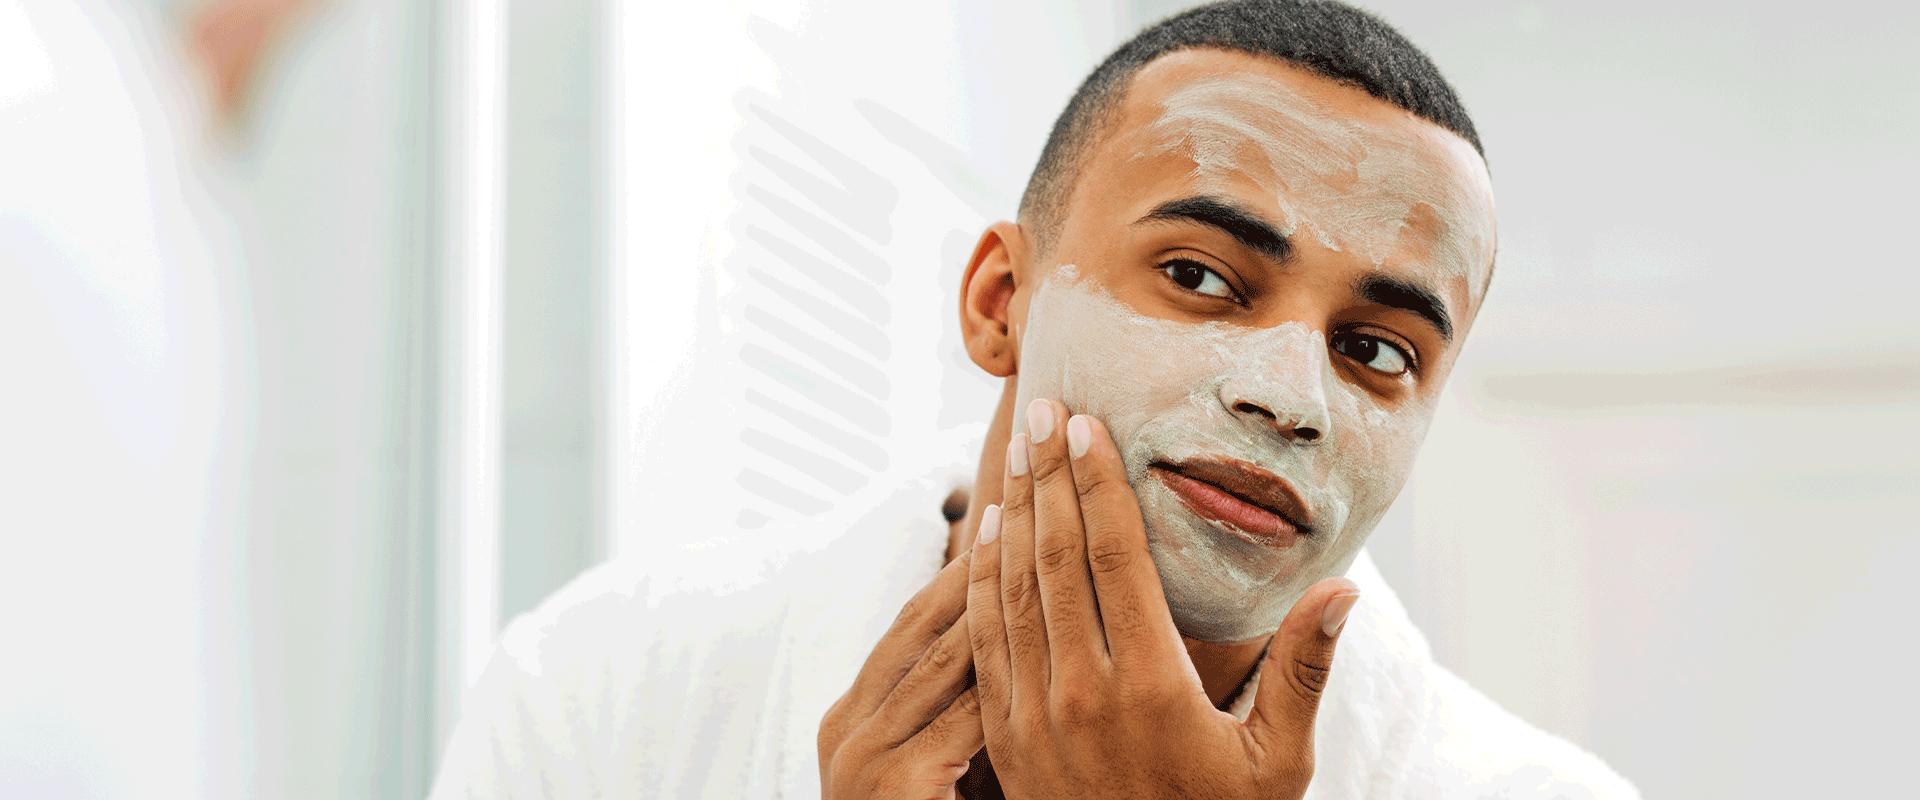 Men's Beauty and Personal Care Is Poised for Handsome Growth | L.E.K.  Consulting